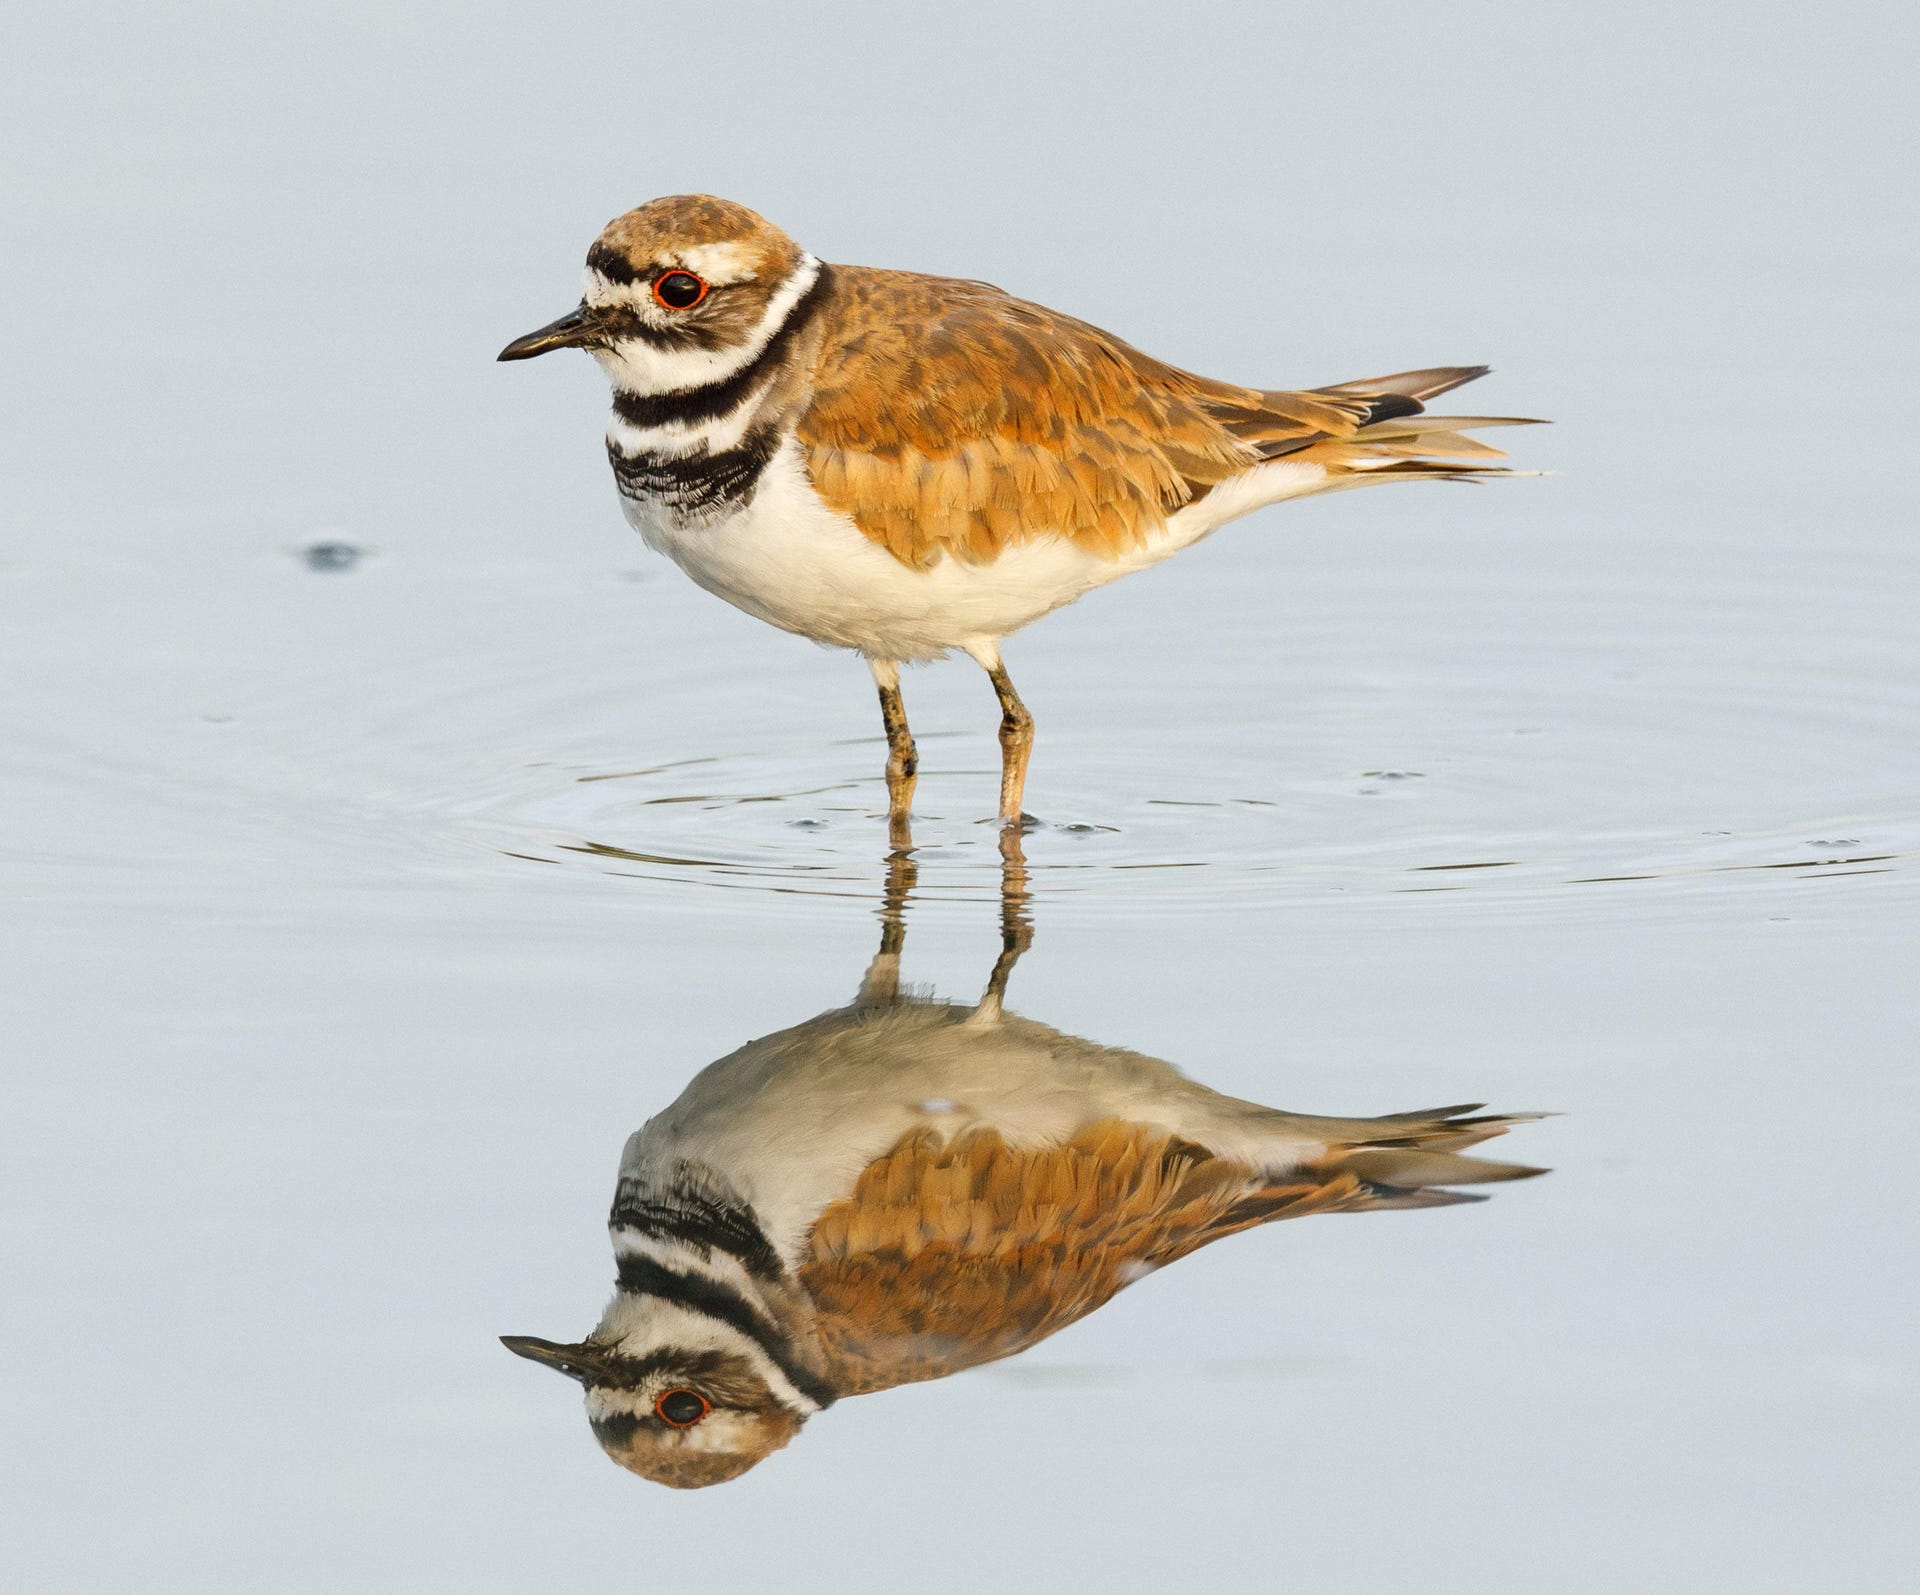 A killdeer with a distinctive red-ringed eye stands reflected in the San Francisco Bay in Palo Alto.